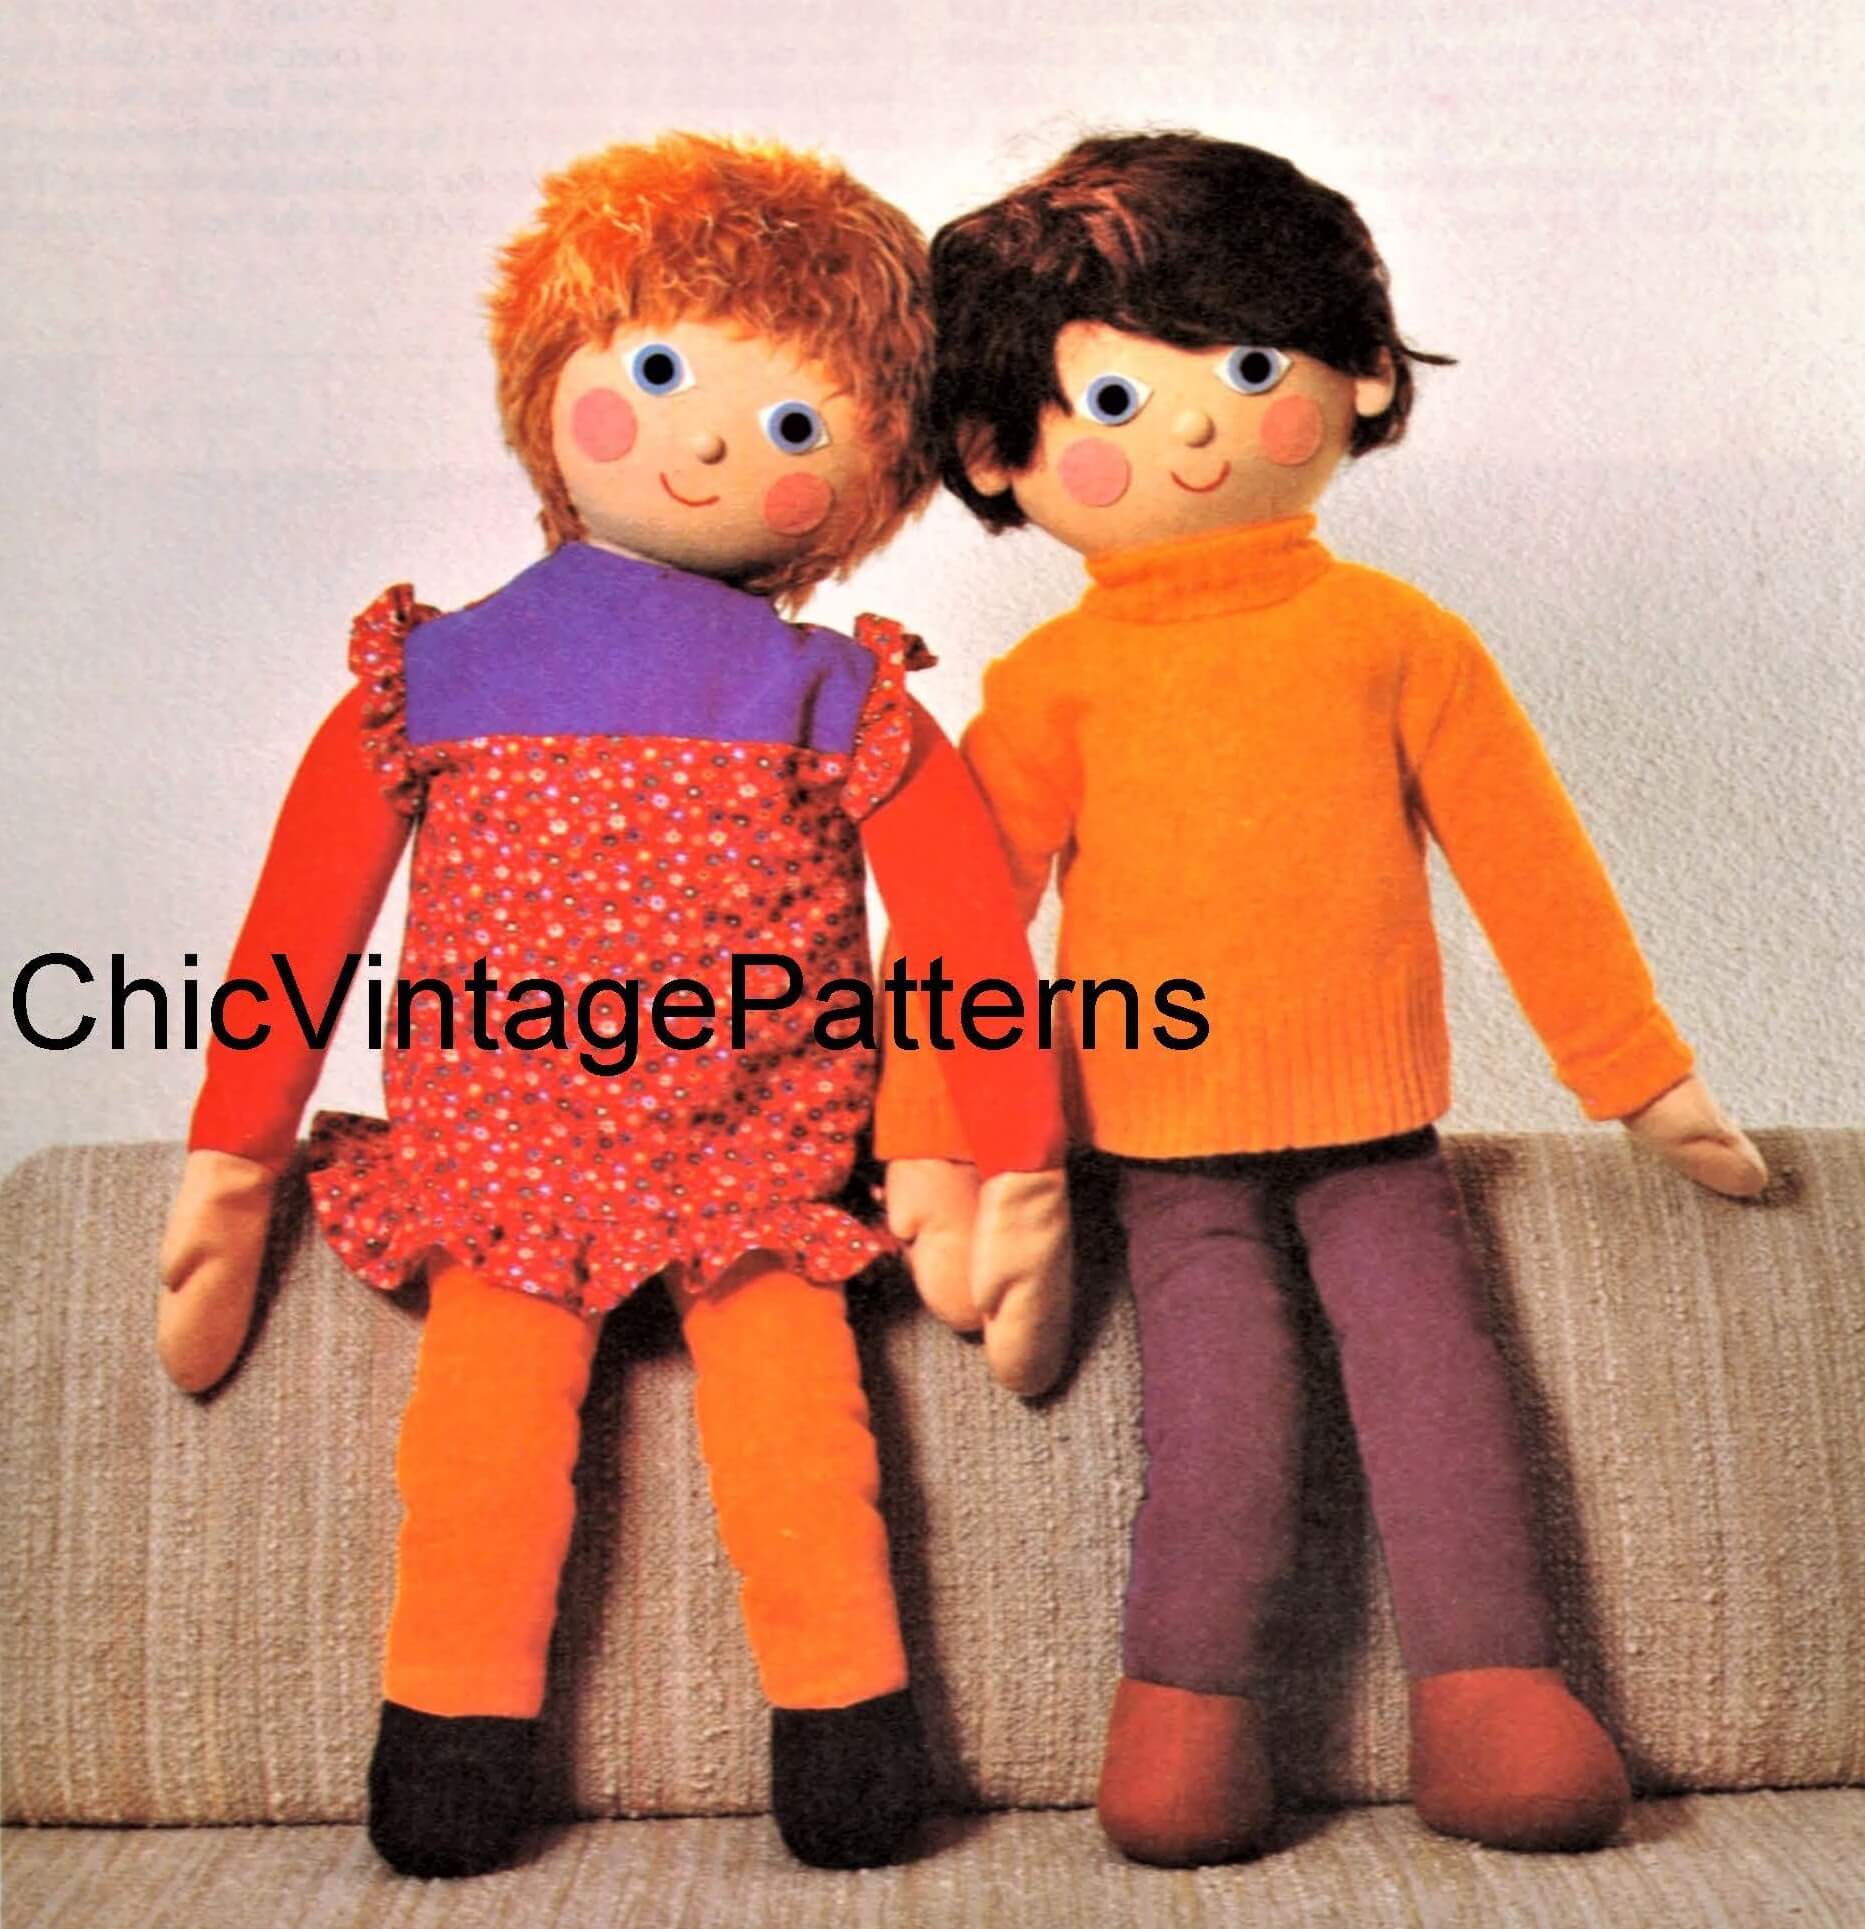 Giant Doll's Sewing Pattern, Vintage Doll Pattern, Instant Download